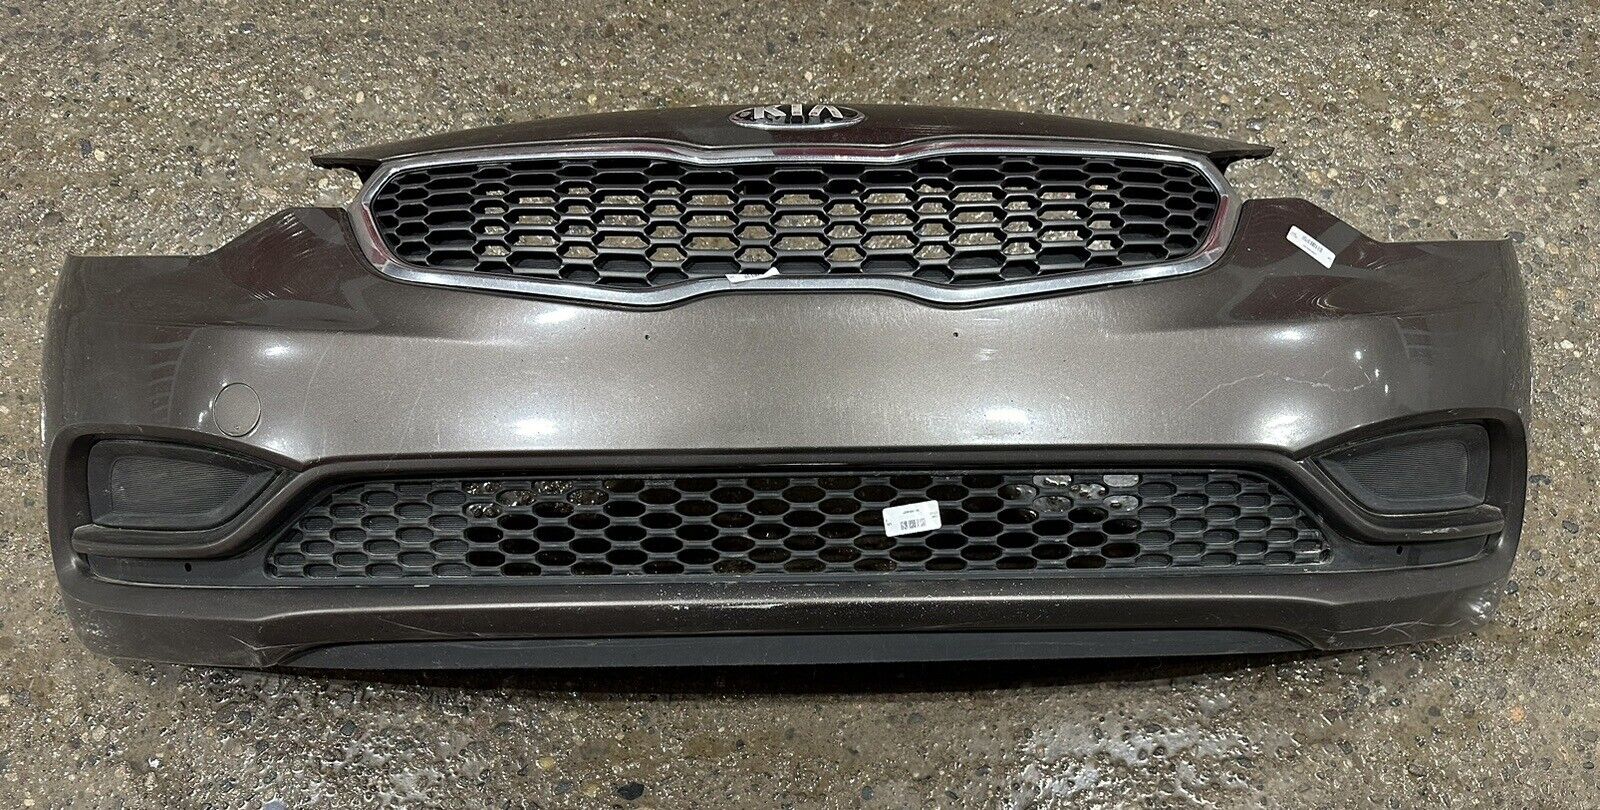 USED 2014-16 KIA FORTE FRONT BUMPER COVER PAINTED COMPLETE ASSEMBLY NO CORE RQD